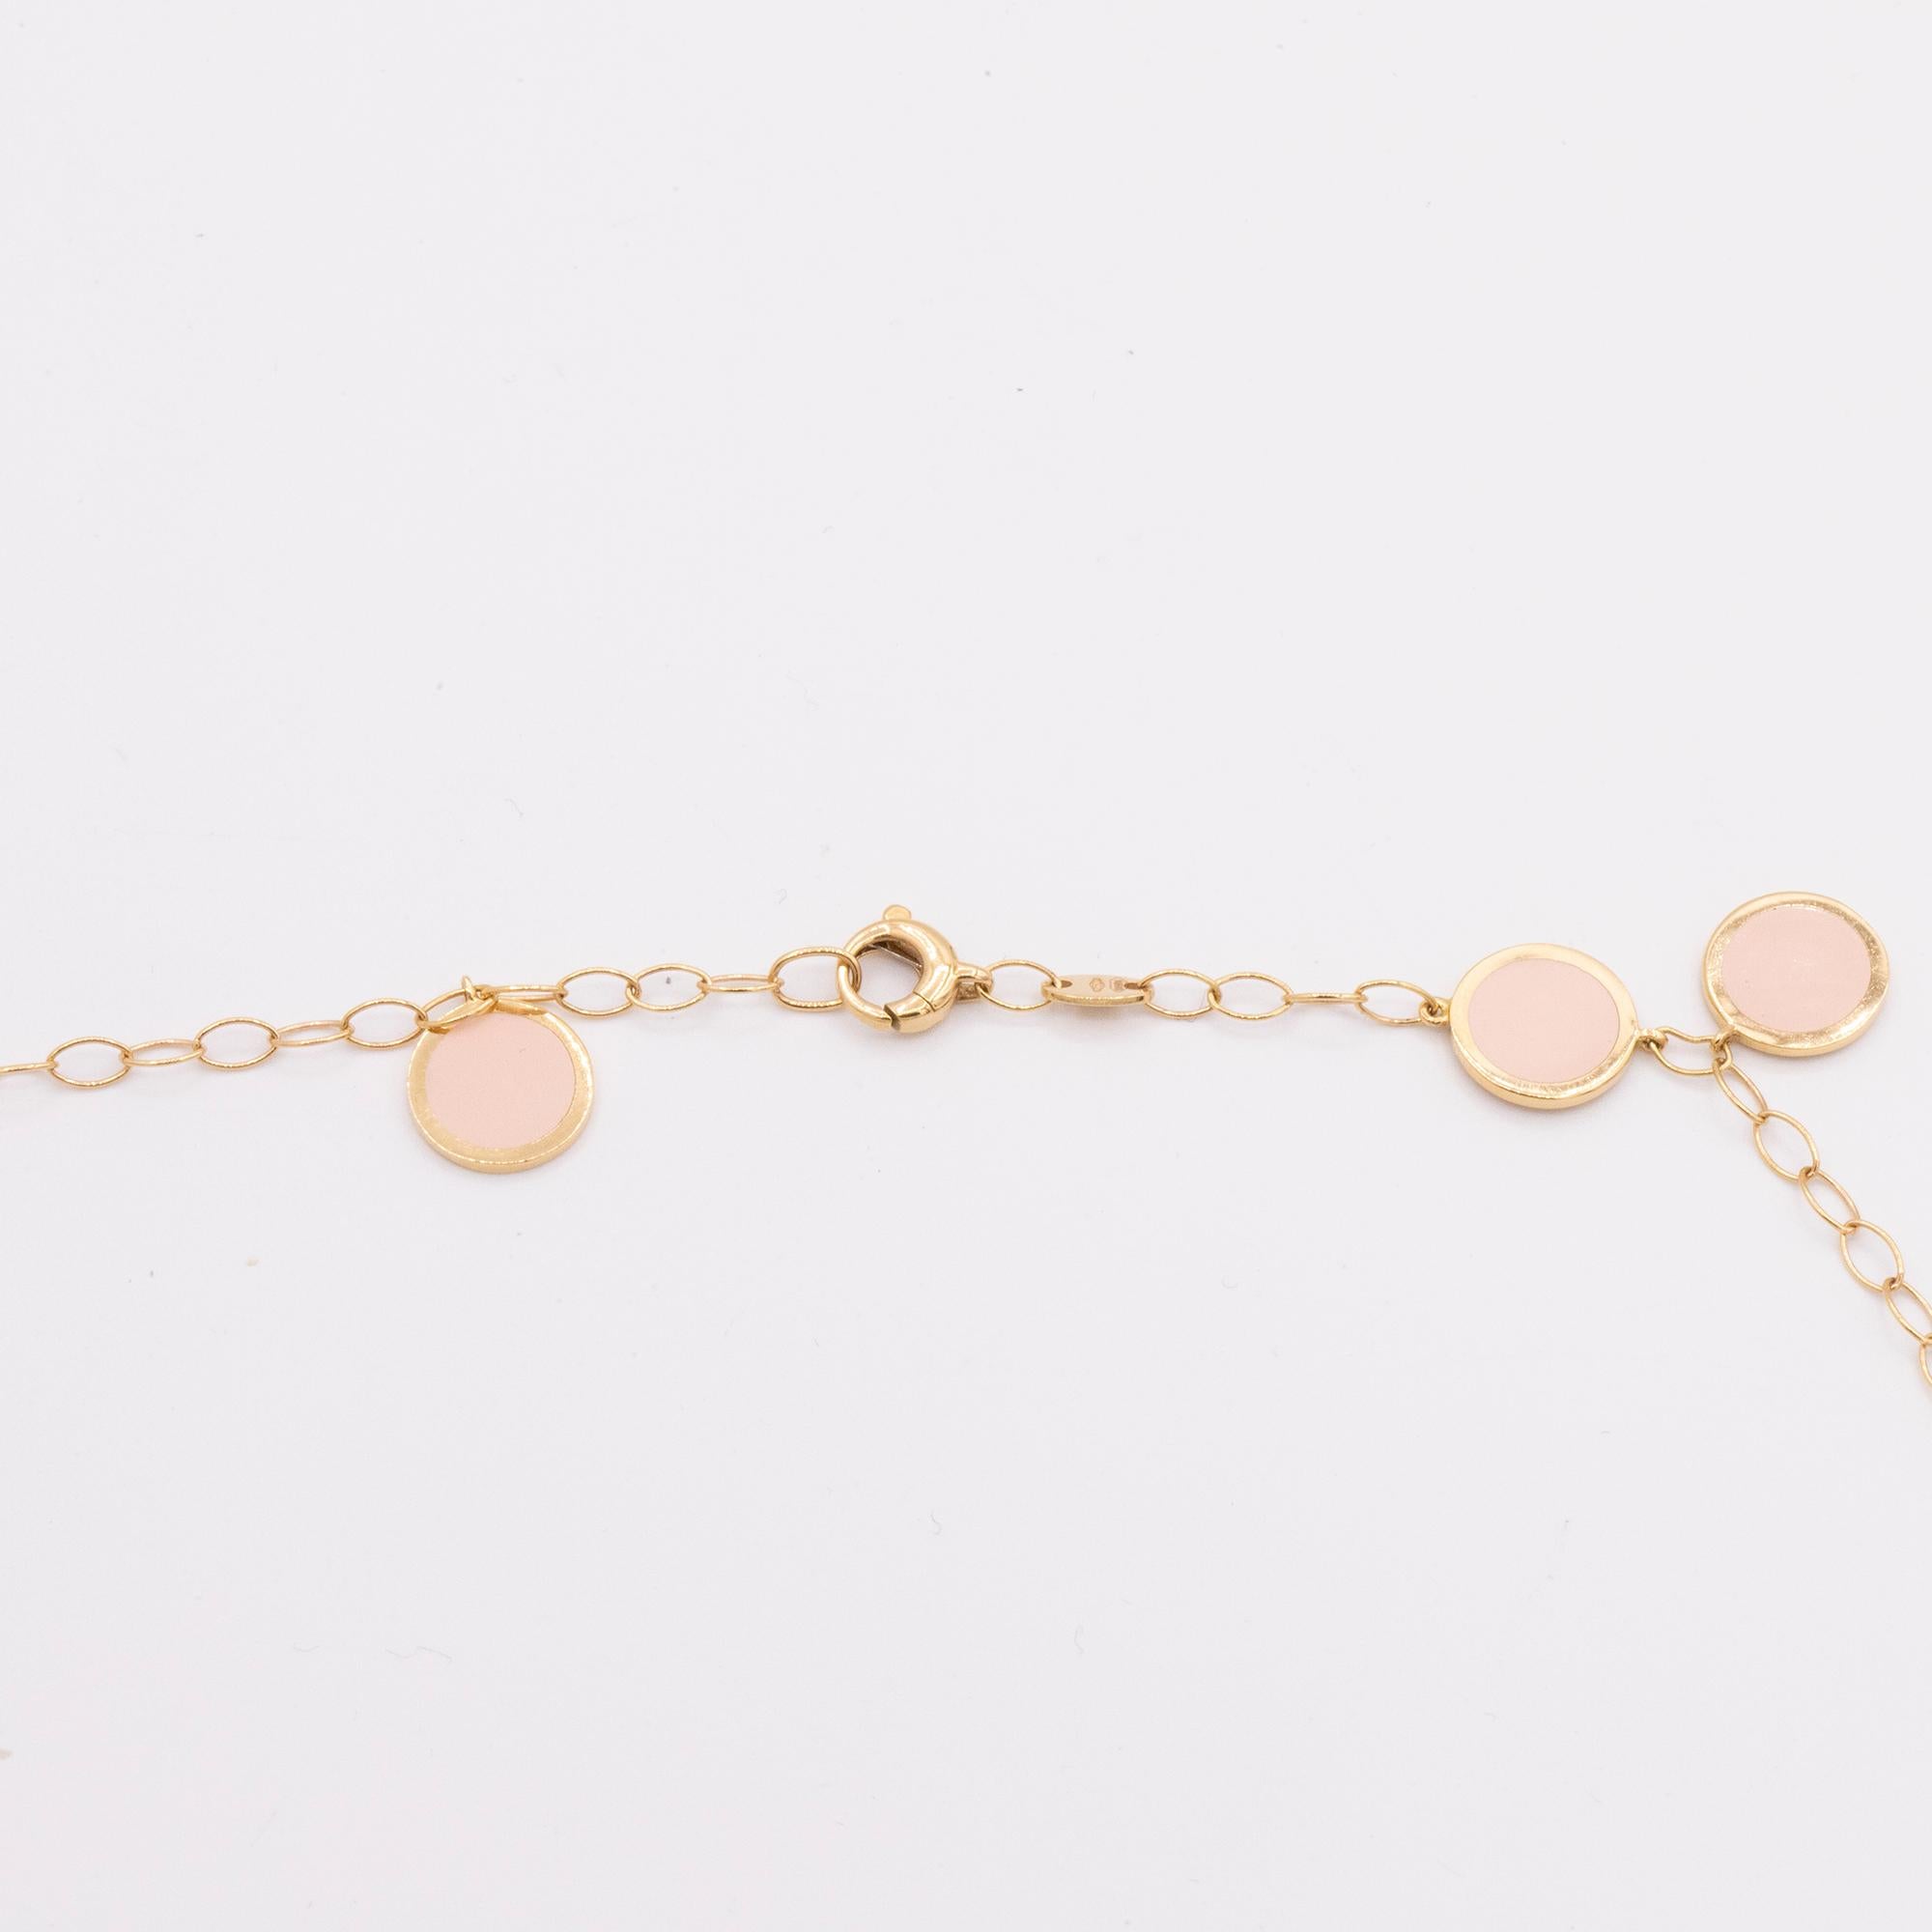 Paillettes celebrates the success of Paillettes collection, The new proportions are moderate and perfect for women who love a discreet jewel as well as for the ones who mix small pieces and therefore affirm their personality. 18k rose gold and pink